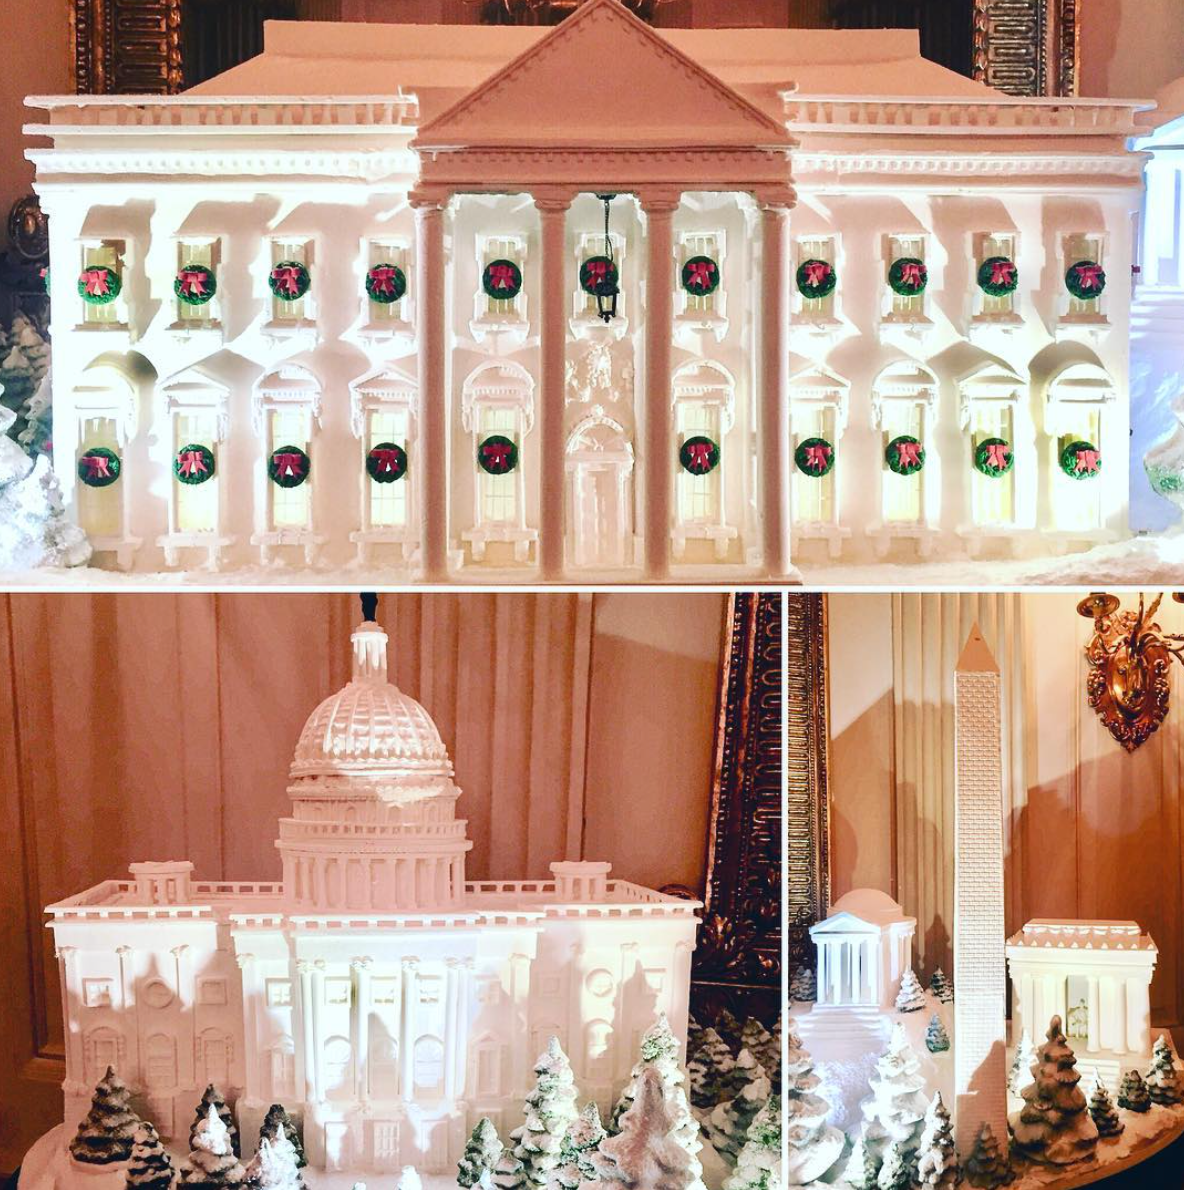 Gingerbread versions of iconic Washington D.C. landmarks by Instagram user @princessintraining_colleen.